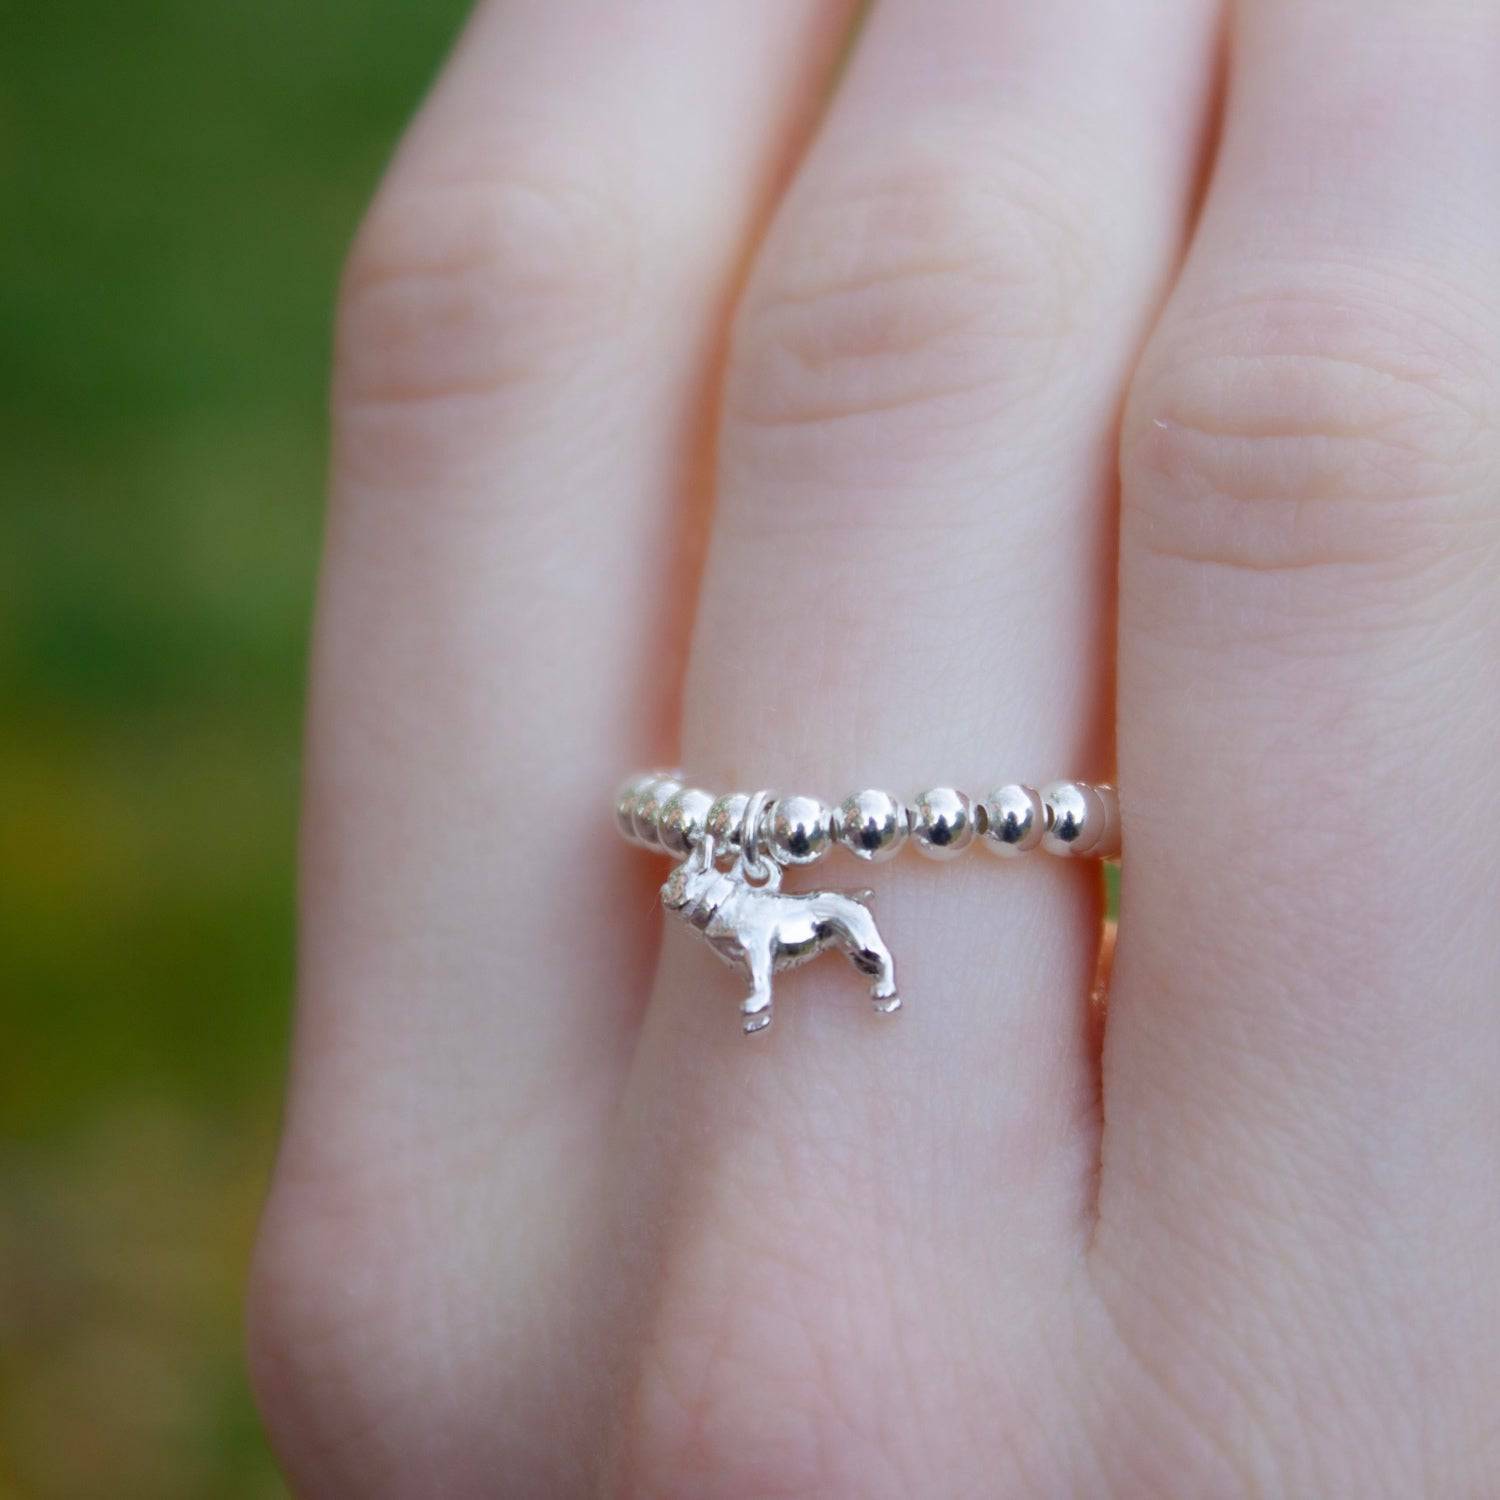 Sterling Silver Ball Bead Ring With French Bulldog Charm - MYLEE London